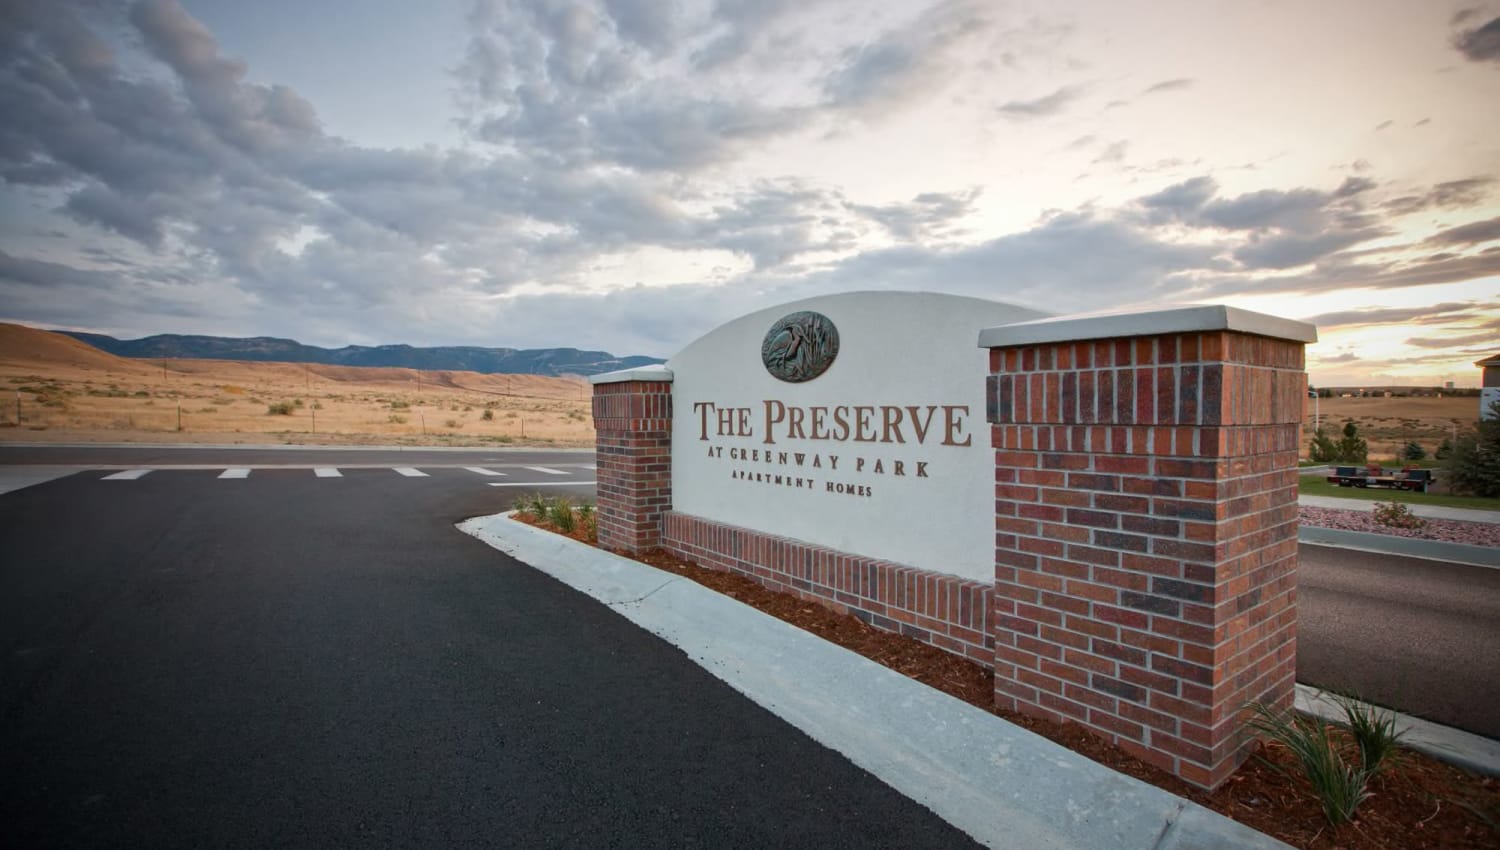 Sign at the entrance to The Preserve at Greenway Park in Casper, Wyoming